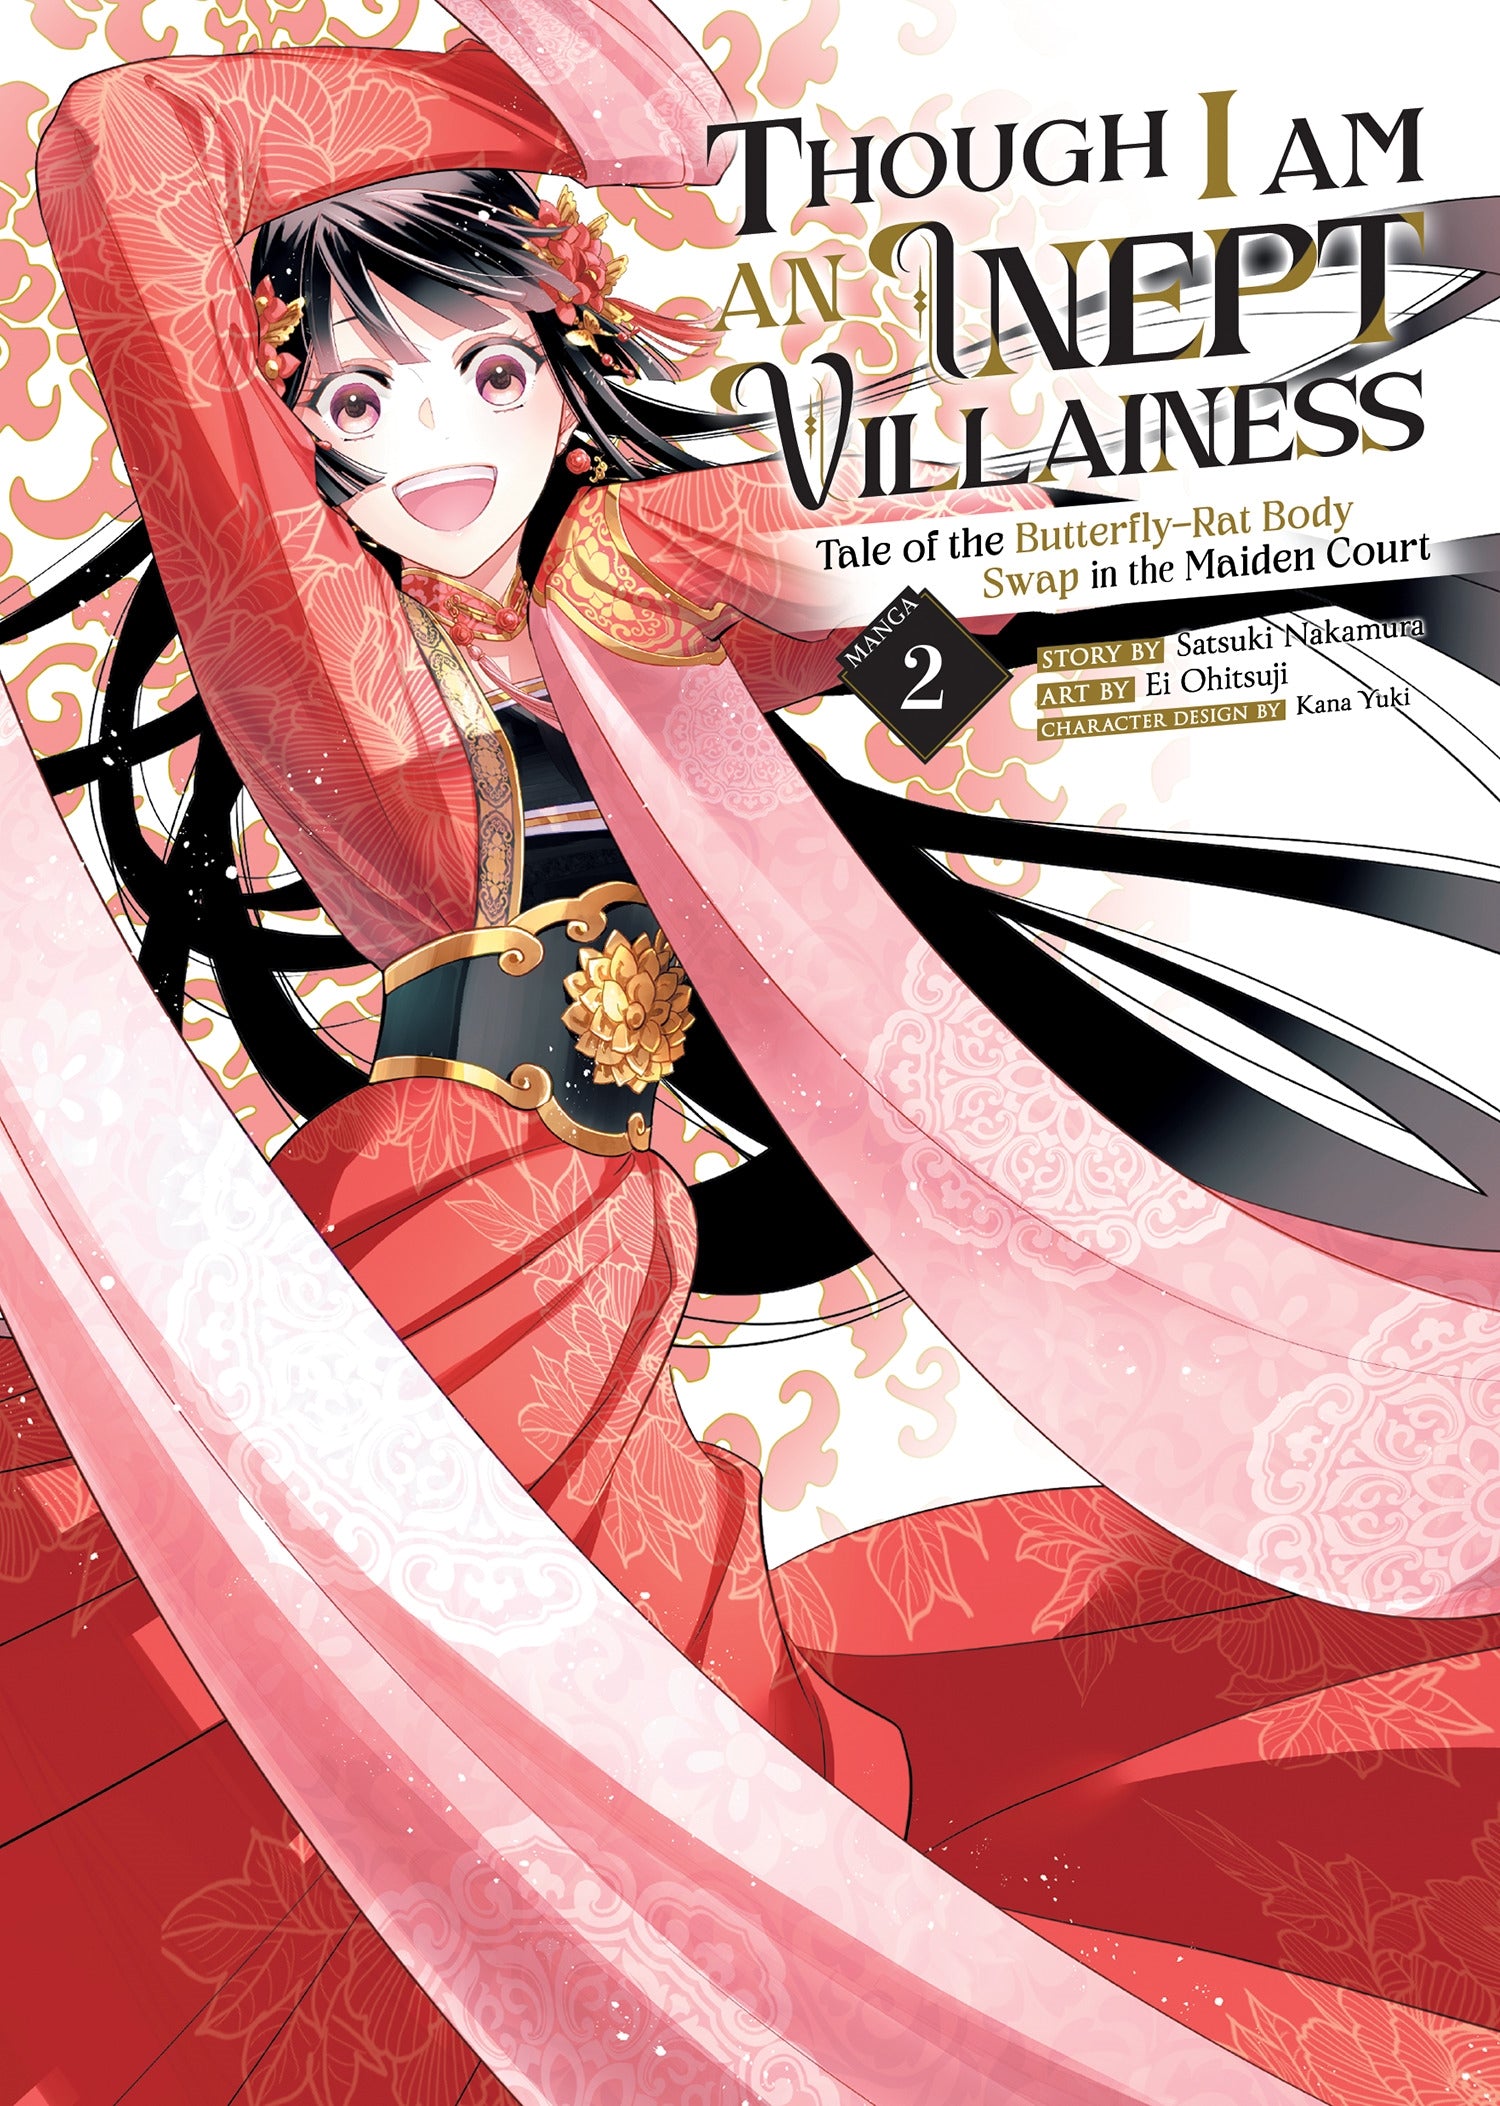 Though I Am an Inept Villainess Tale of the Butterfly-Rat Body Swap in the Maiden Court (Manga) - Vol. 2